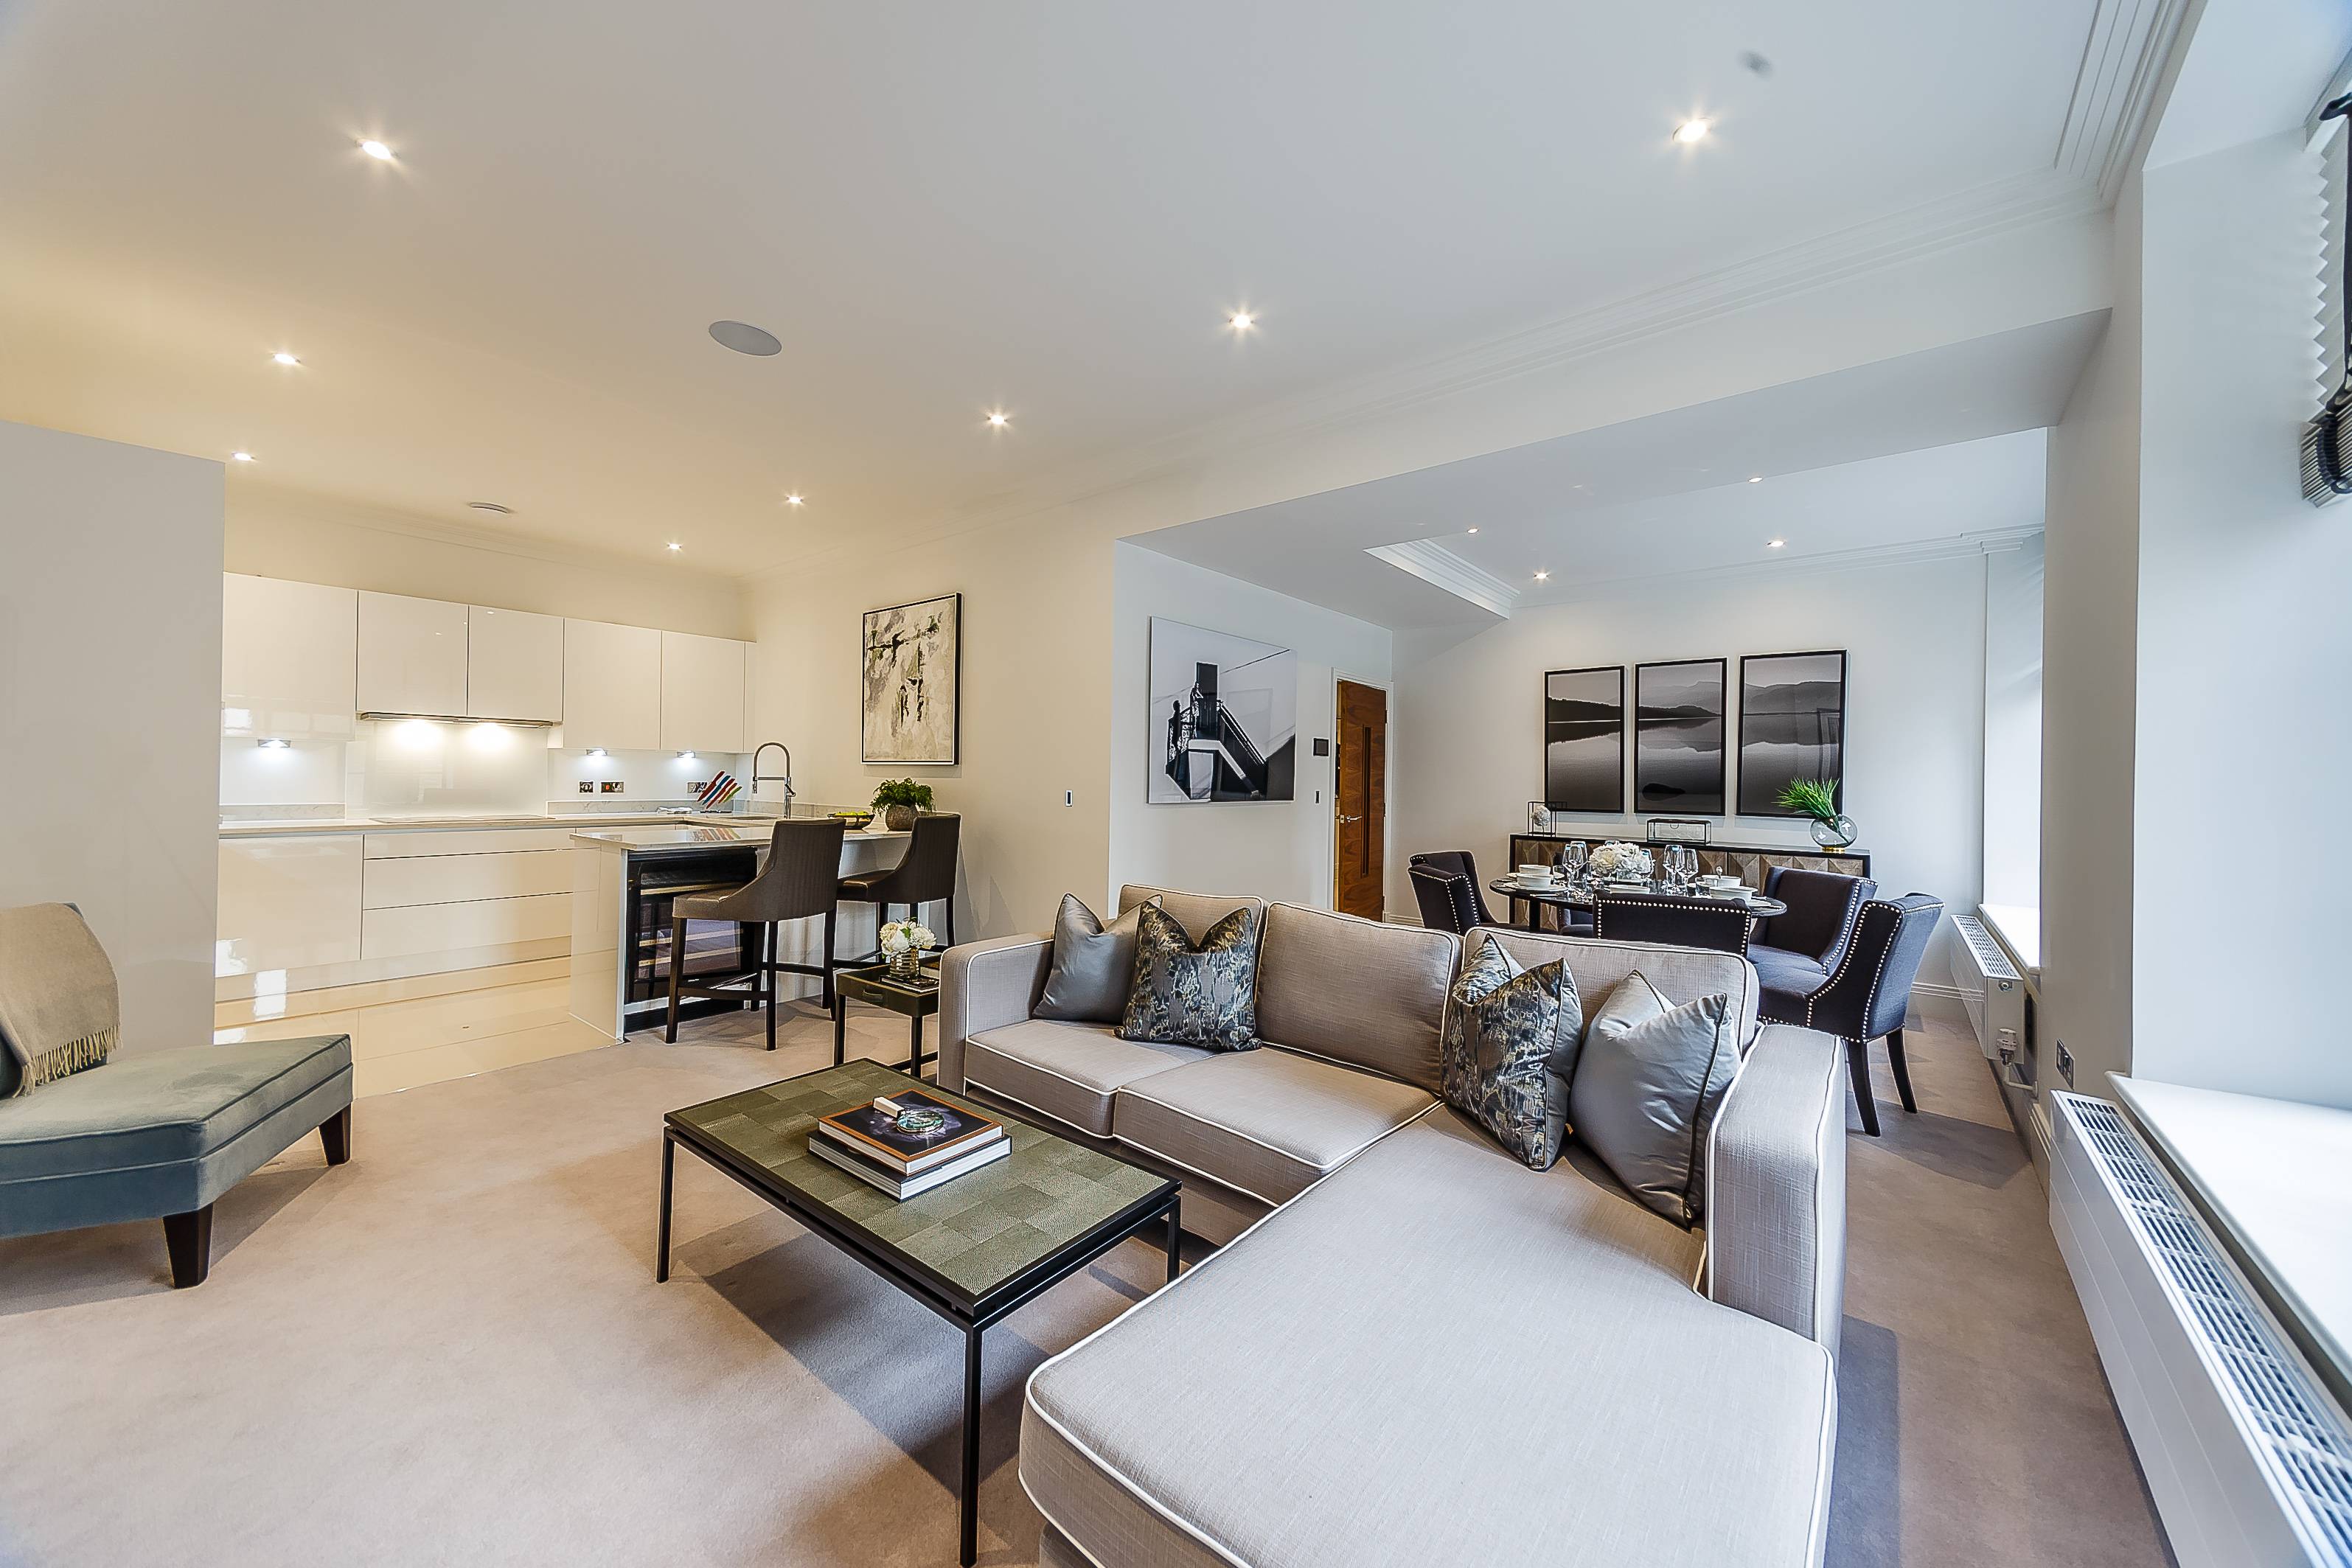 Brand new interior designed two bedroom, two bathroom first floor apartment facing the courtyard is set within this newly converted, warehouse style, gated development on the River Thames